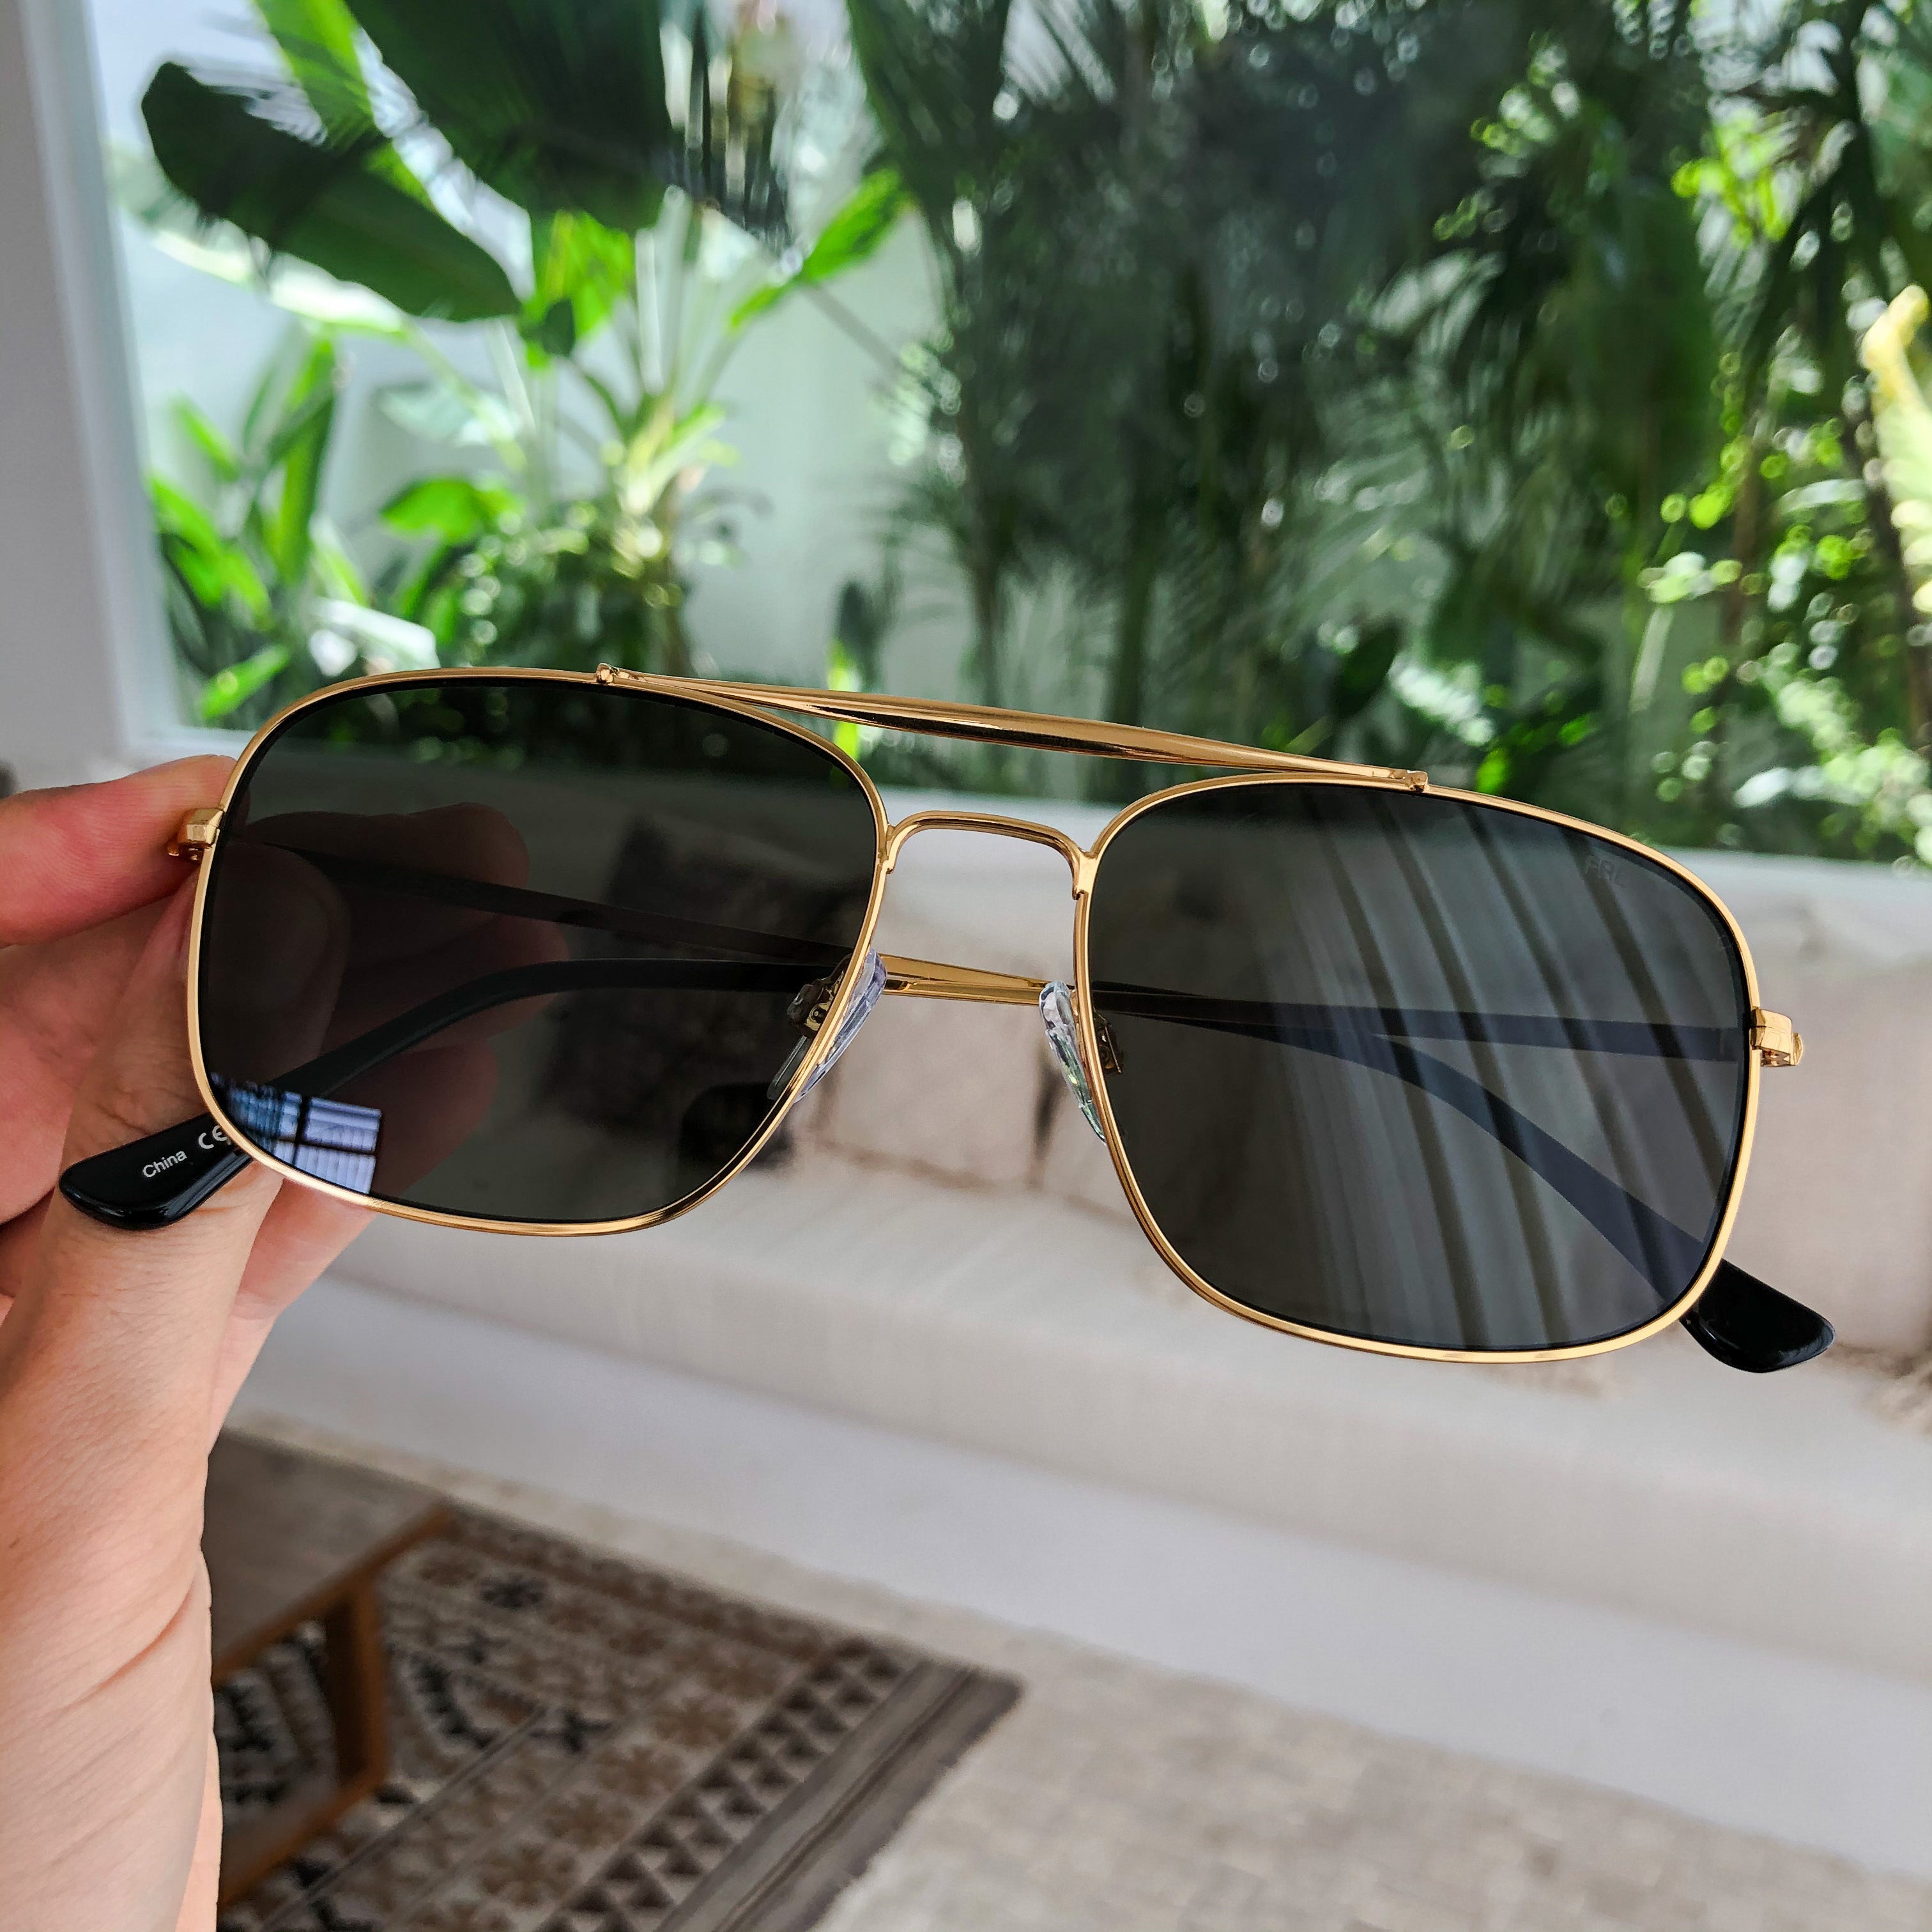 How to Wear the Ray-Ban Clubmaster – Fashion Eyewear